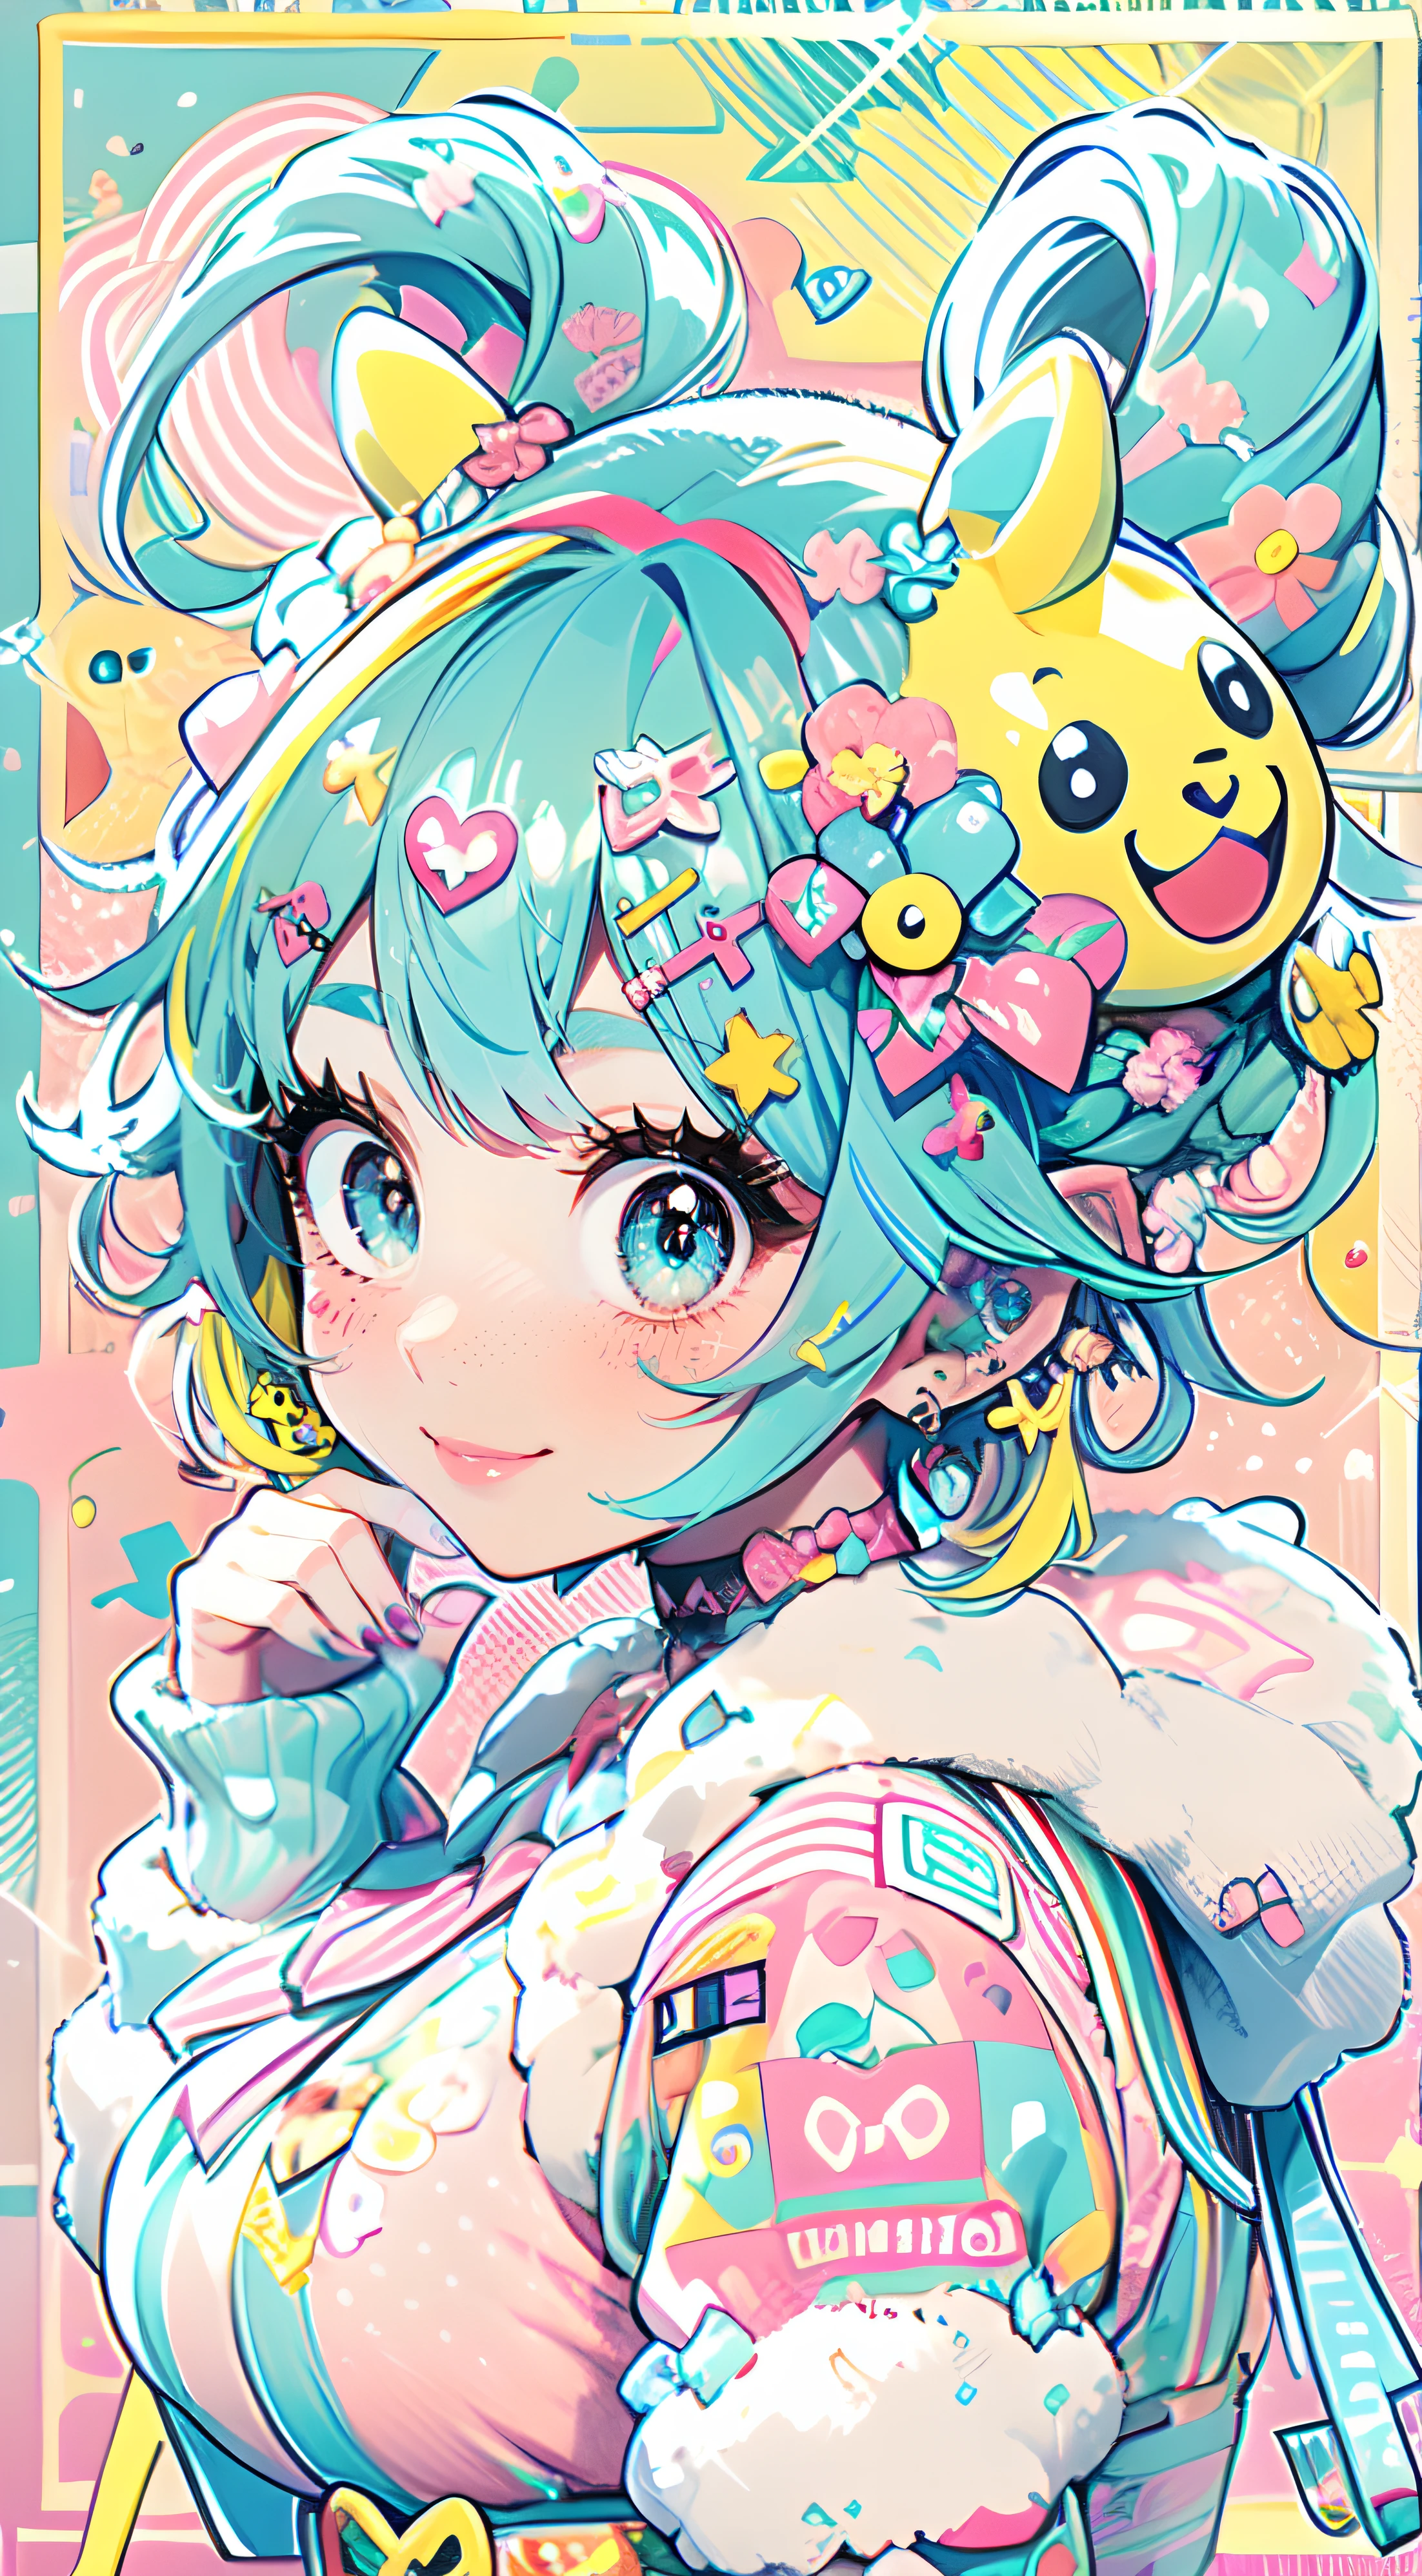 "kawaii, cute, adorable woman with pink, yellow, and baby blue color scheme. She is dressed in sky-themed clothes made out of clouds and sky motifs. Her outfit is fluffy and soft, with decora accessories like hairclips. She embodies the vibrant and trendy Harajuku fashion style." horns, demon wings, big ,big ass, big lips, juicy lips, huge hair, smile, short hair with buns